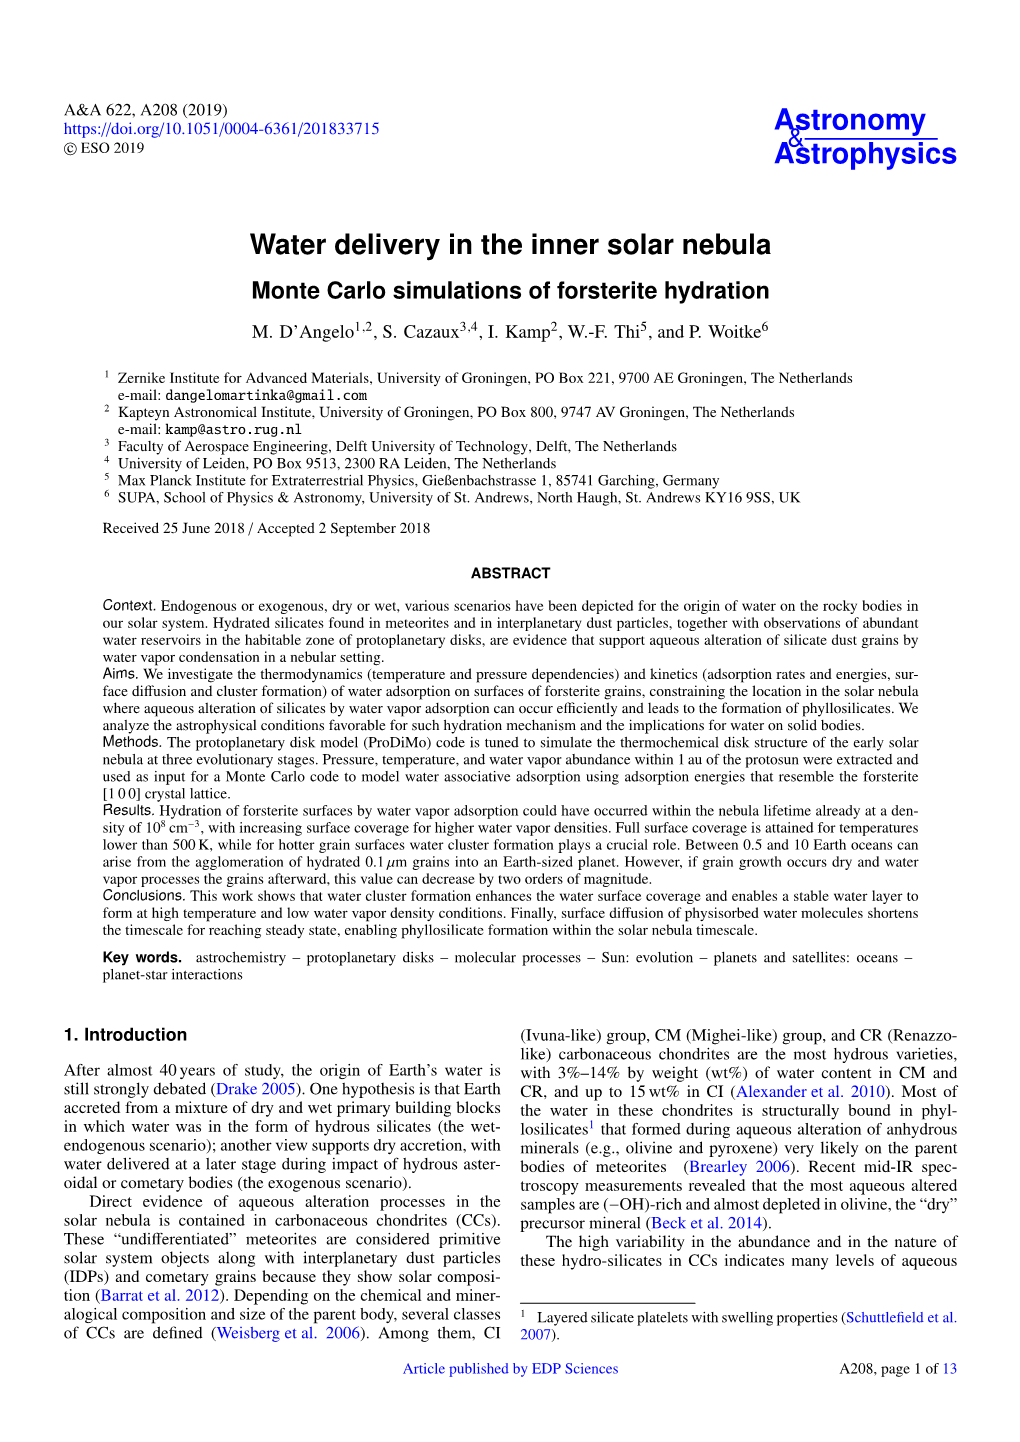 Water Delivery in the Inner Solar Nebula Monte Carlo Simulations of Forsterite Hydration